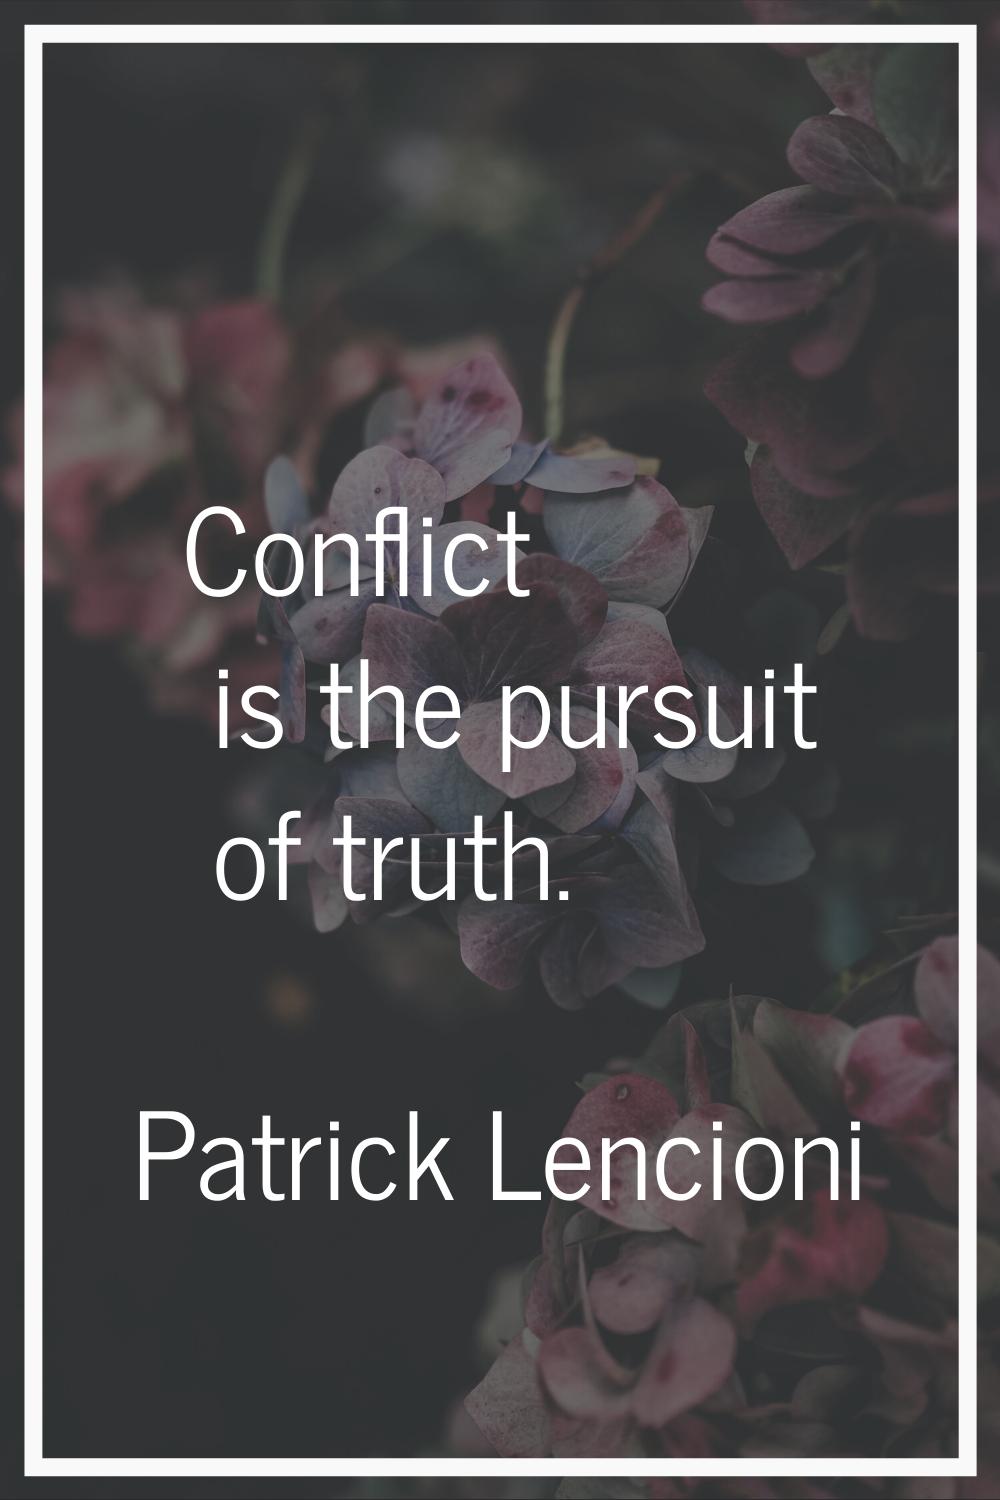 Conflict is the pursuit of truth.